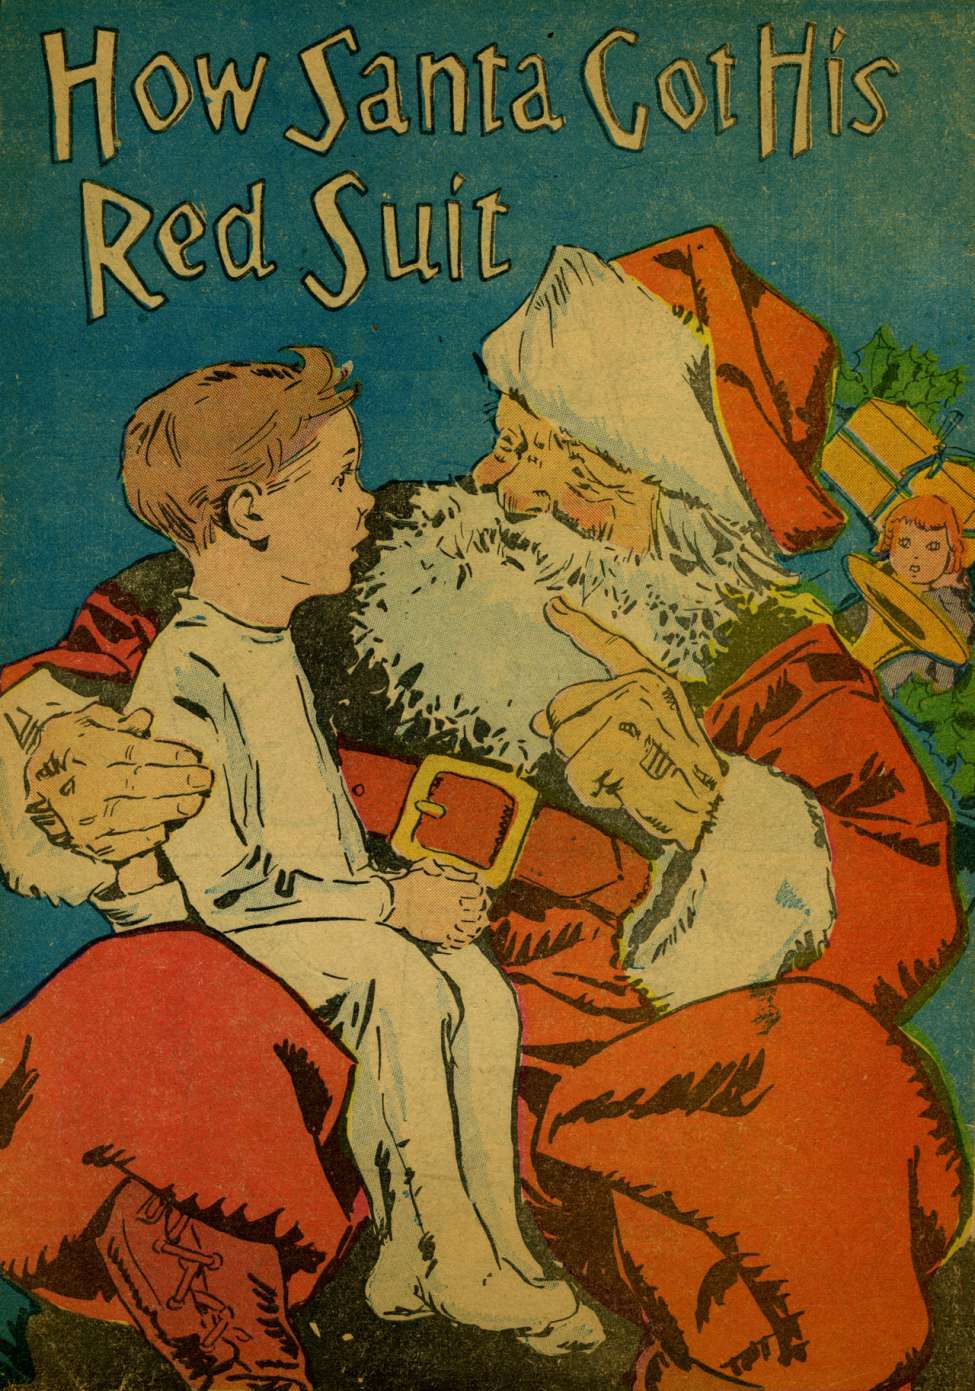 Book Cover For March of Comics 2 - How Santa Got His Red Suit